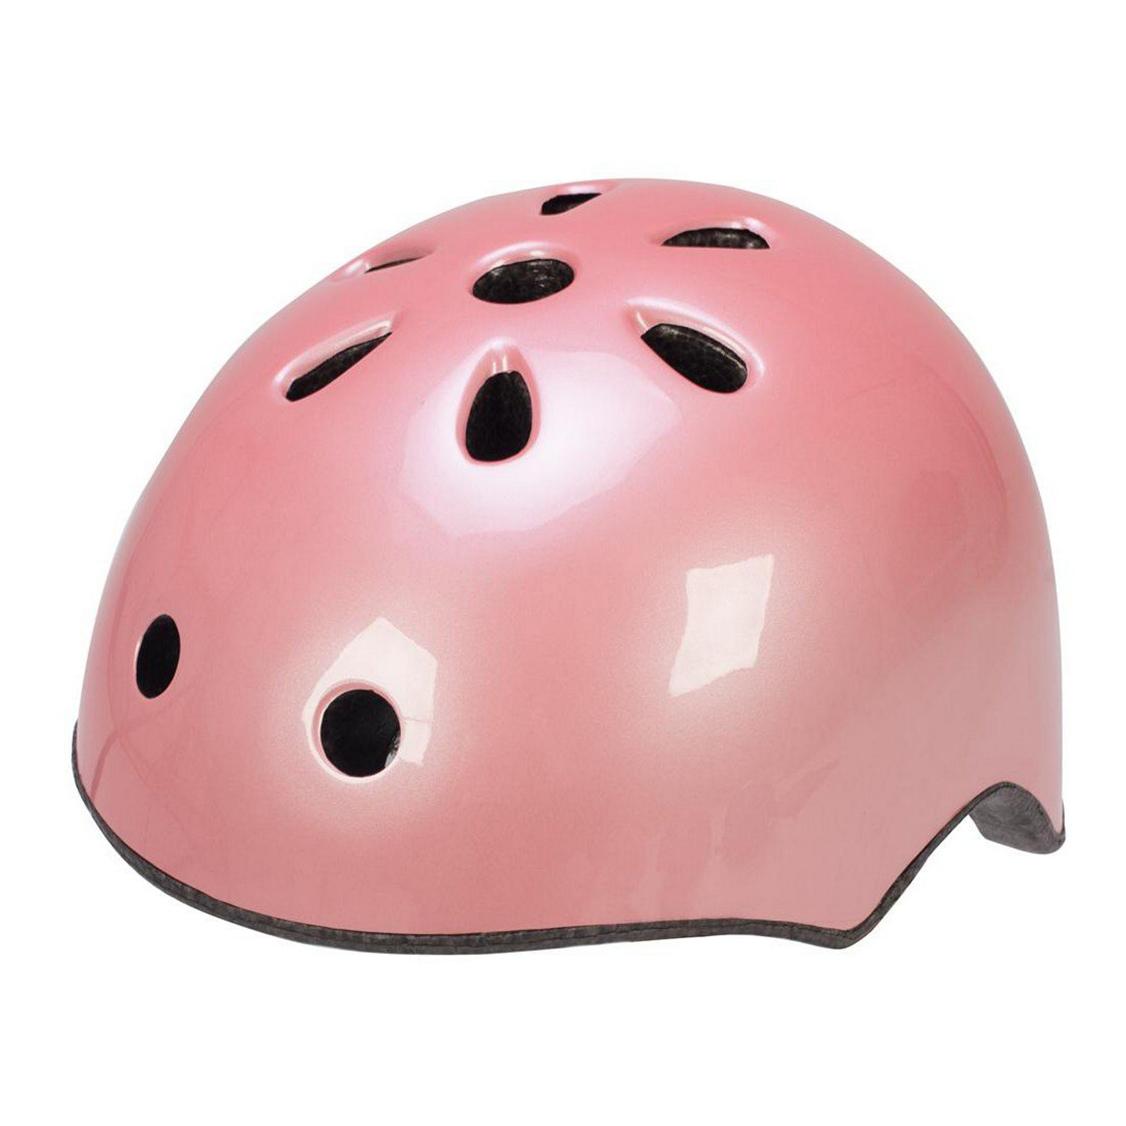 Raleigh CASQUE SHERWOOK ENFANT ROSE TAILLE 48-54 Rose 